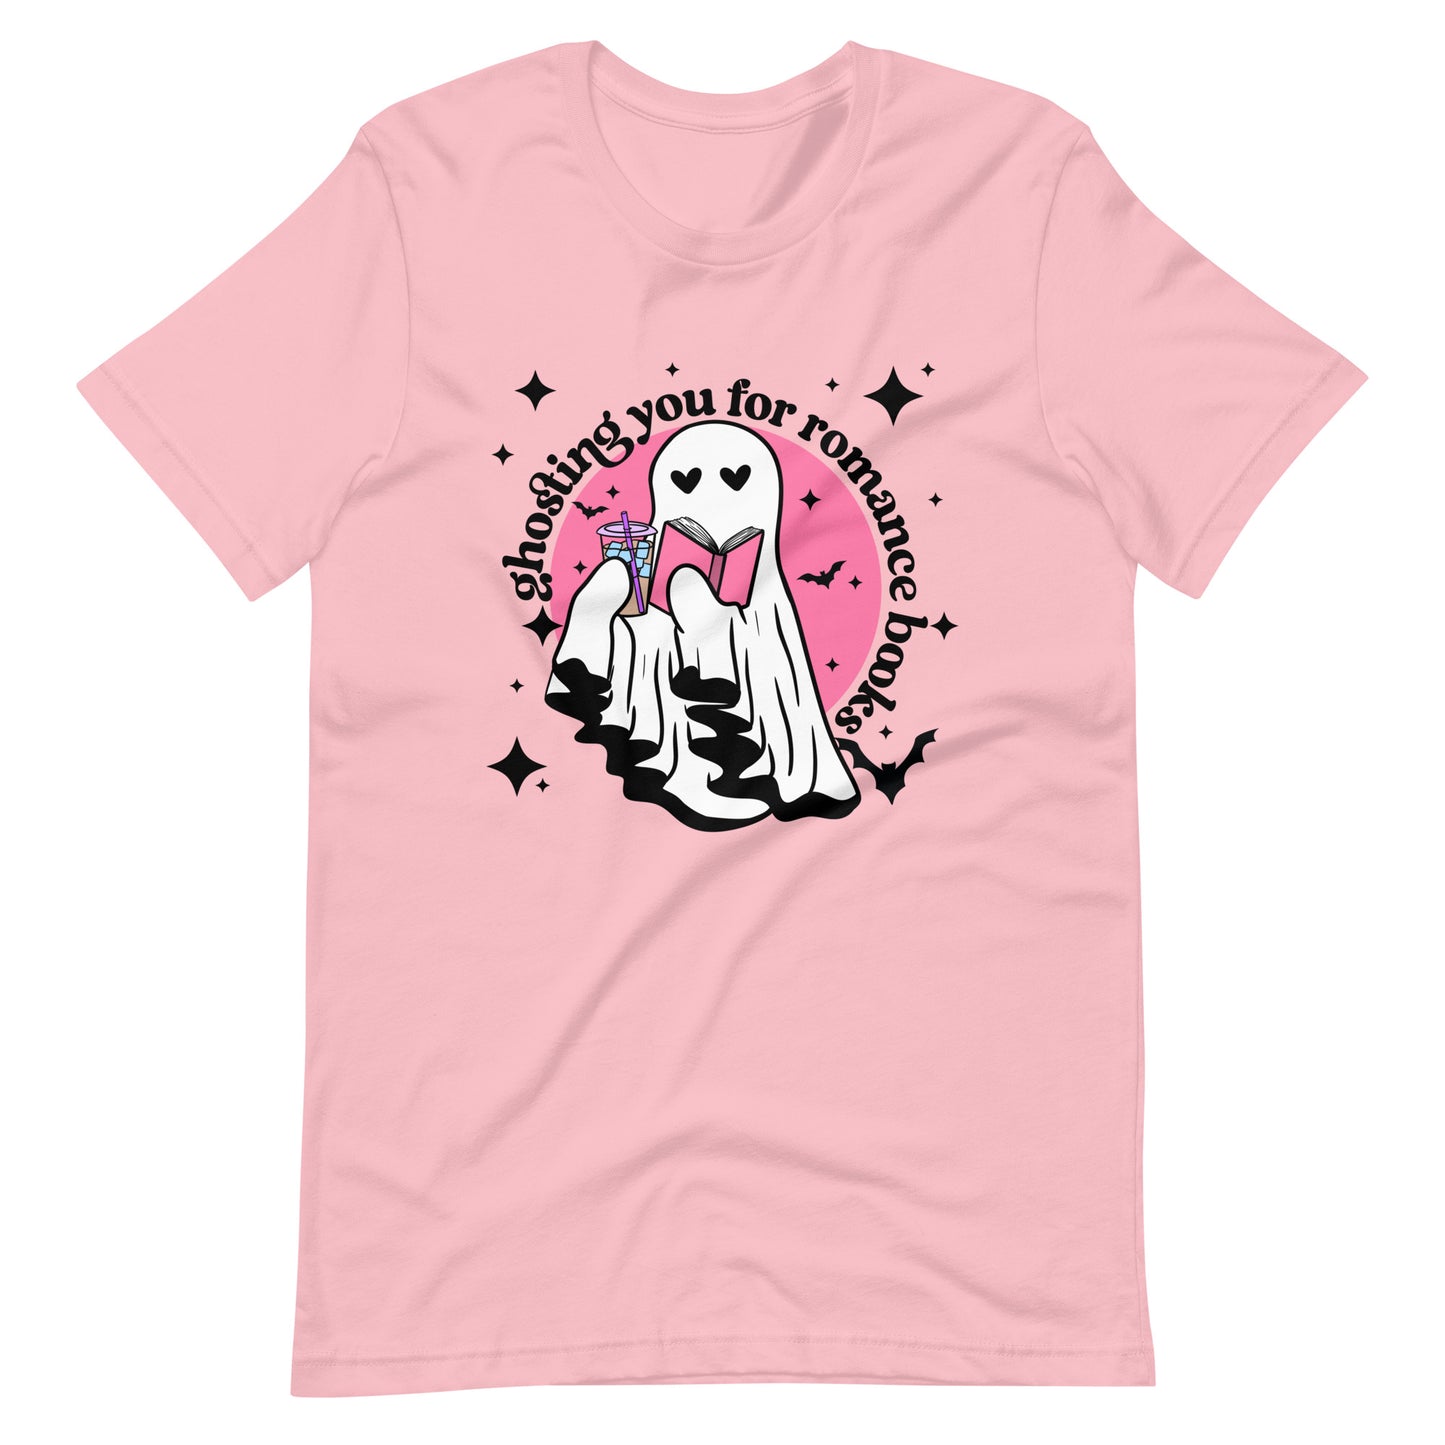 Ghosting You For Romance Books Shirt